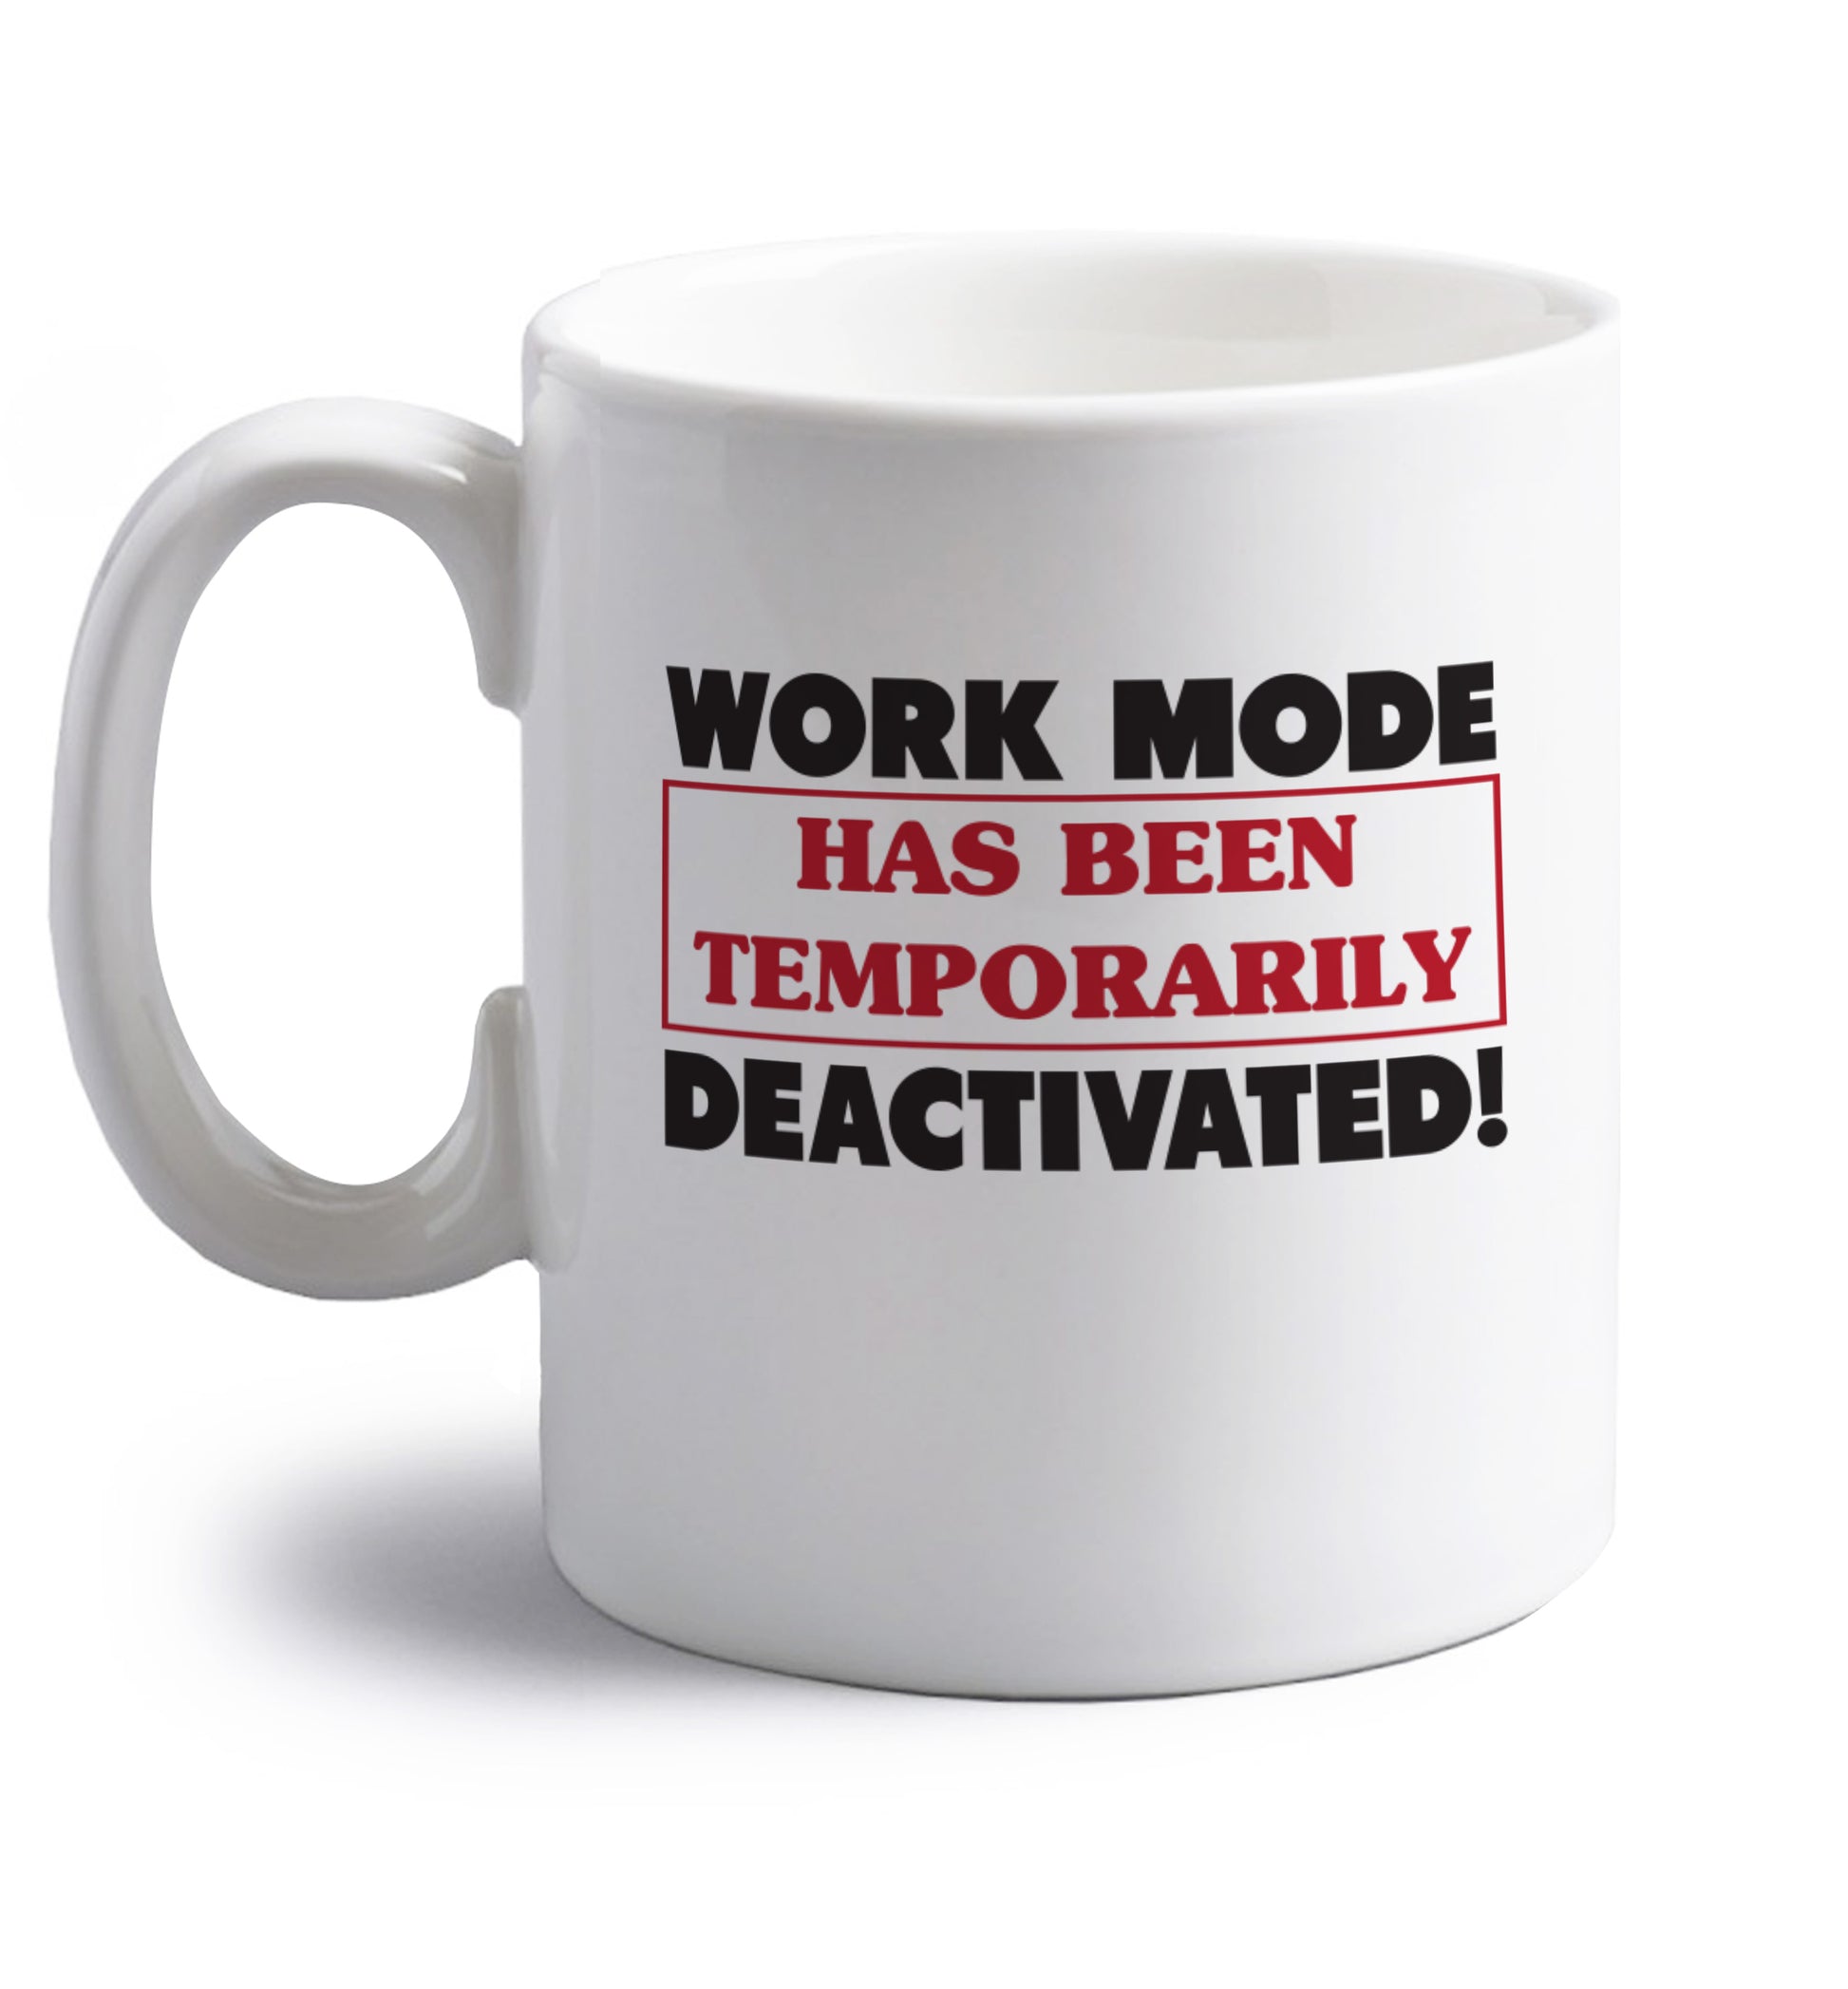 Work mode has now been temporarily deactivated right handed white ceramic mug 